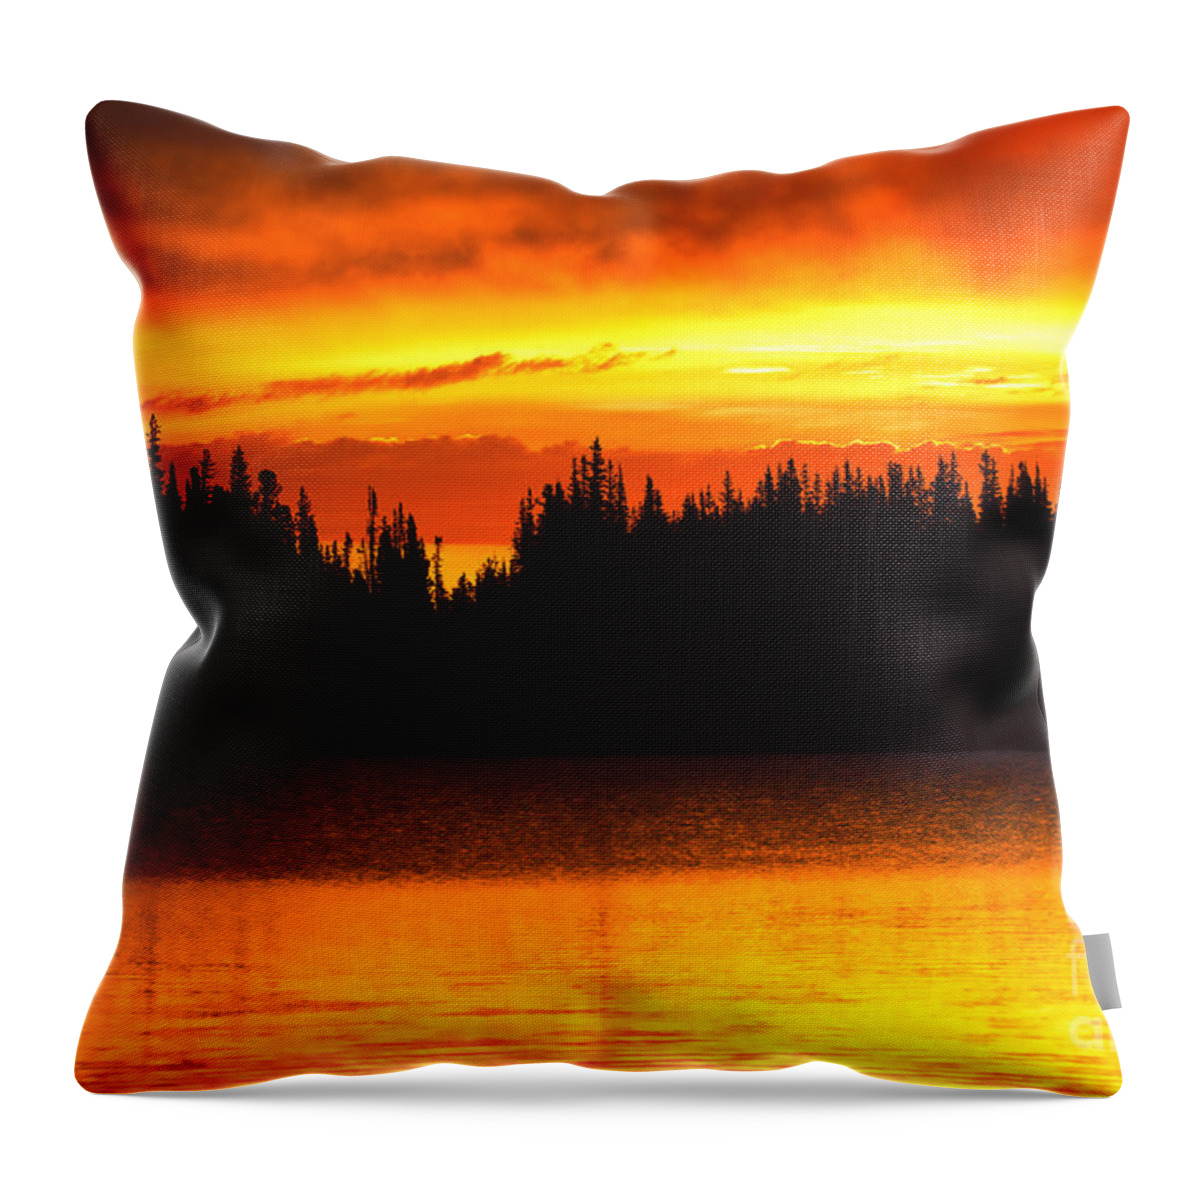 Colorado Throw Pillow featuring the photograph Morning Fire by Aaron Whittemore